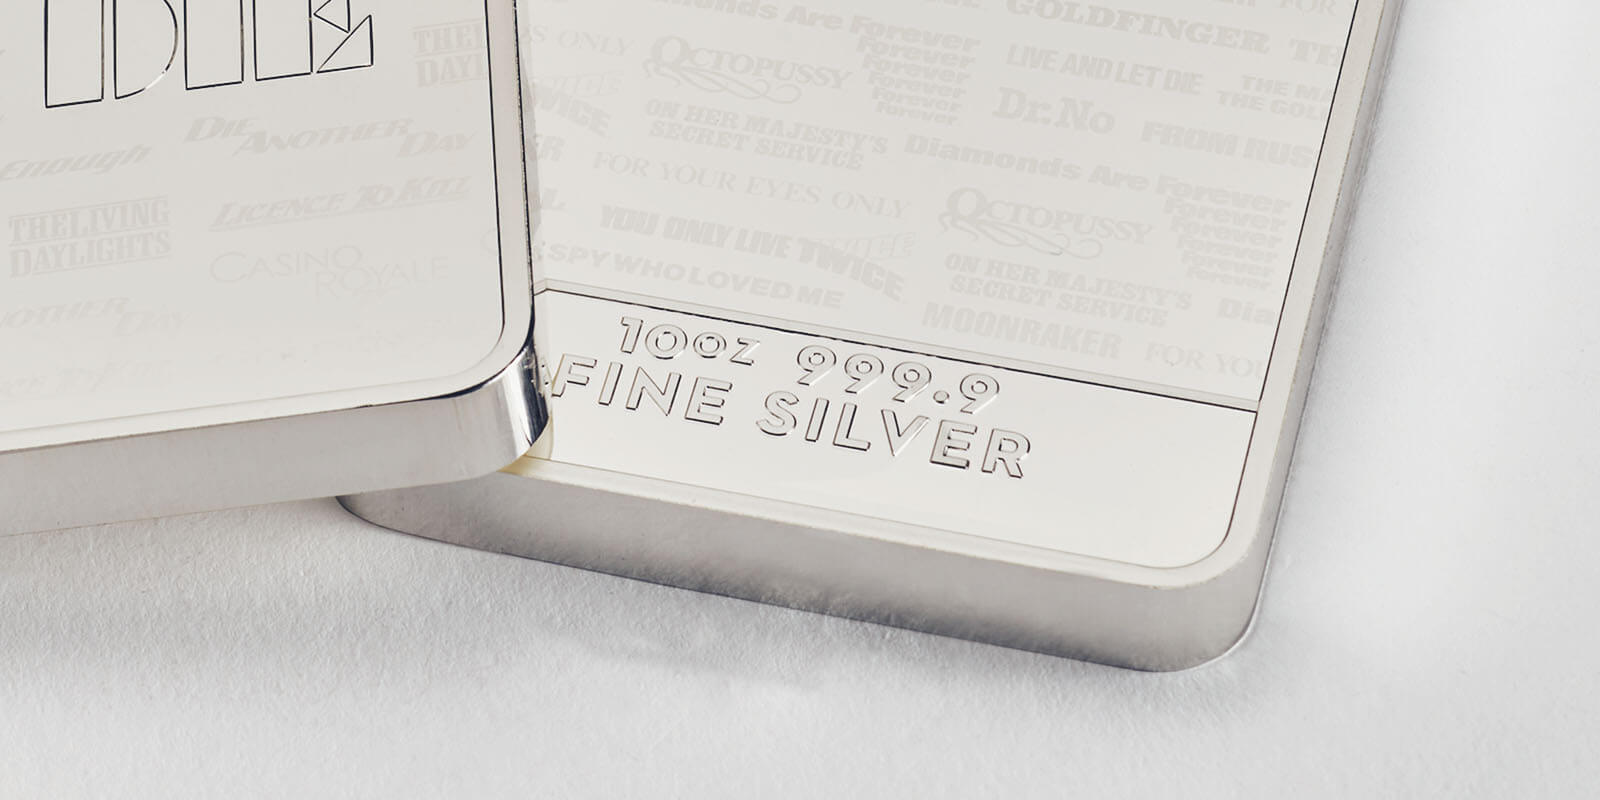 4. An Introduction to Silver Investment